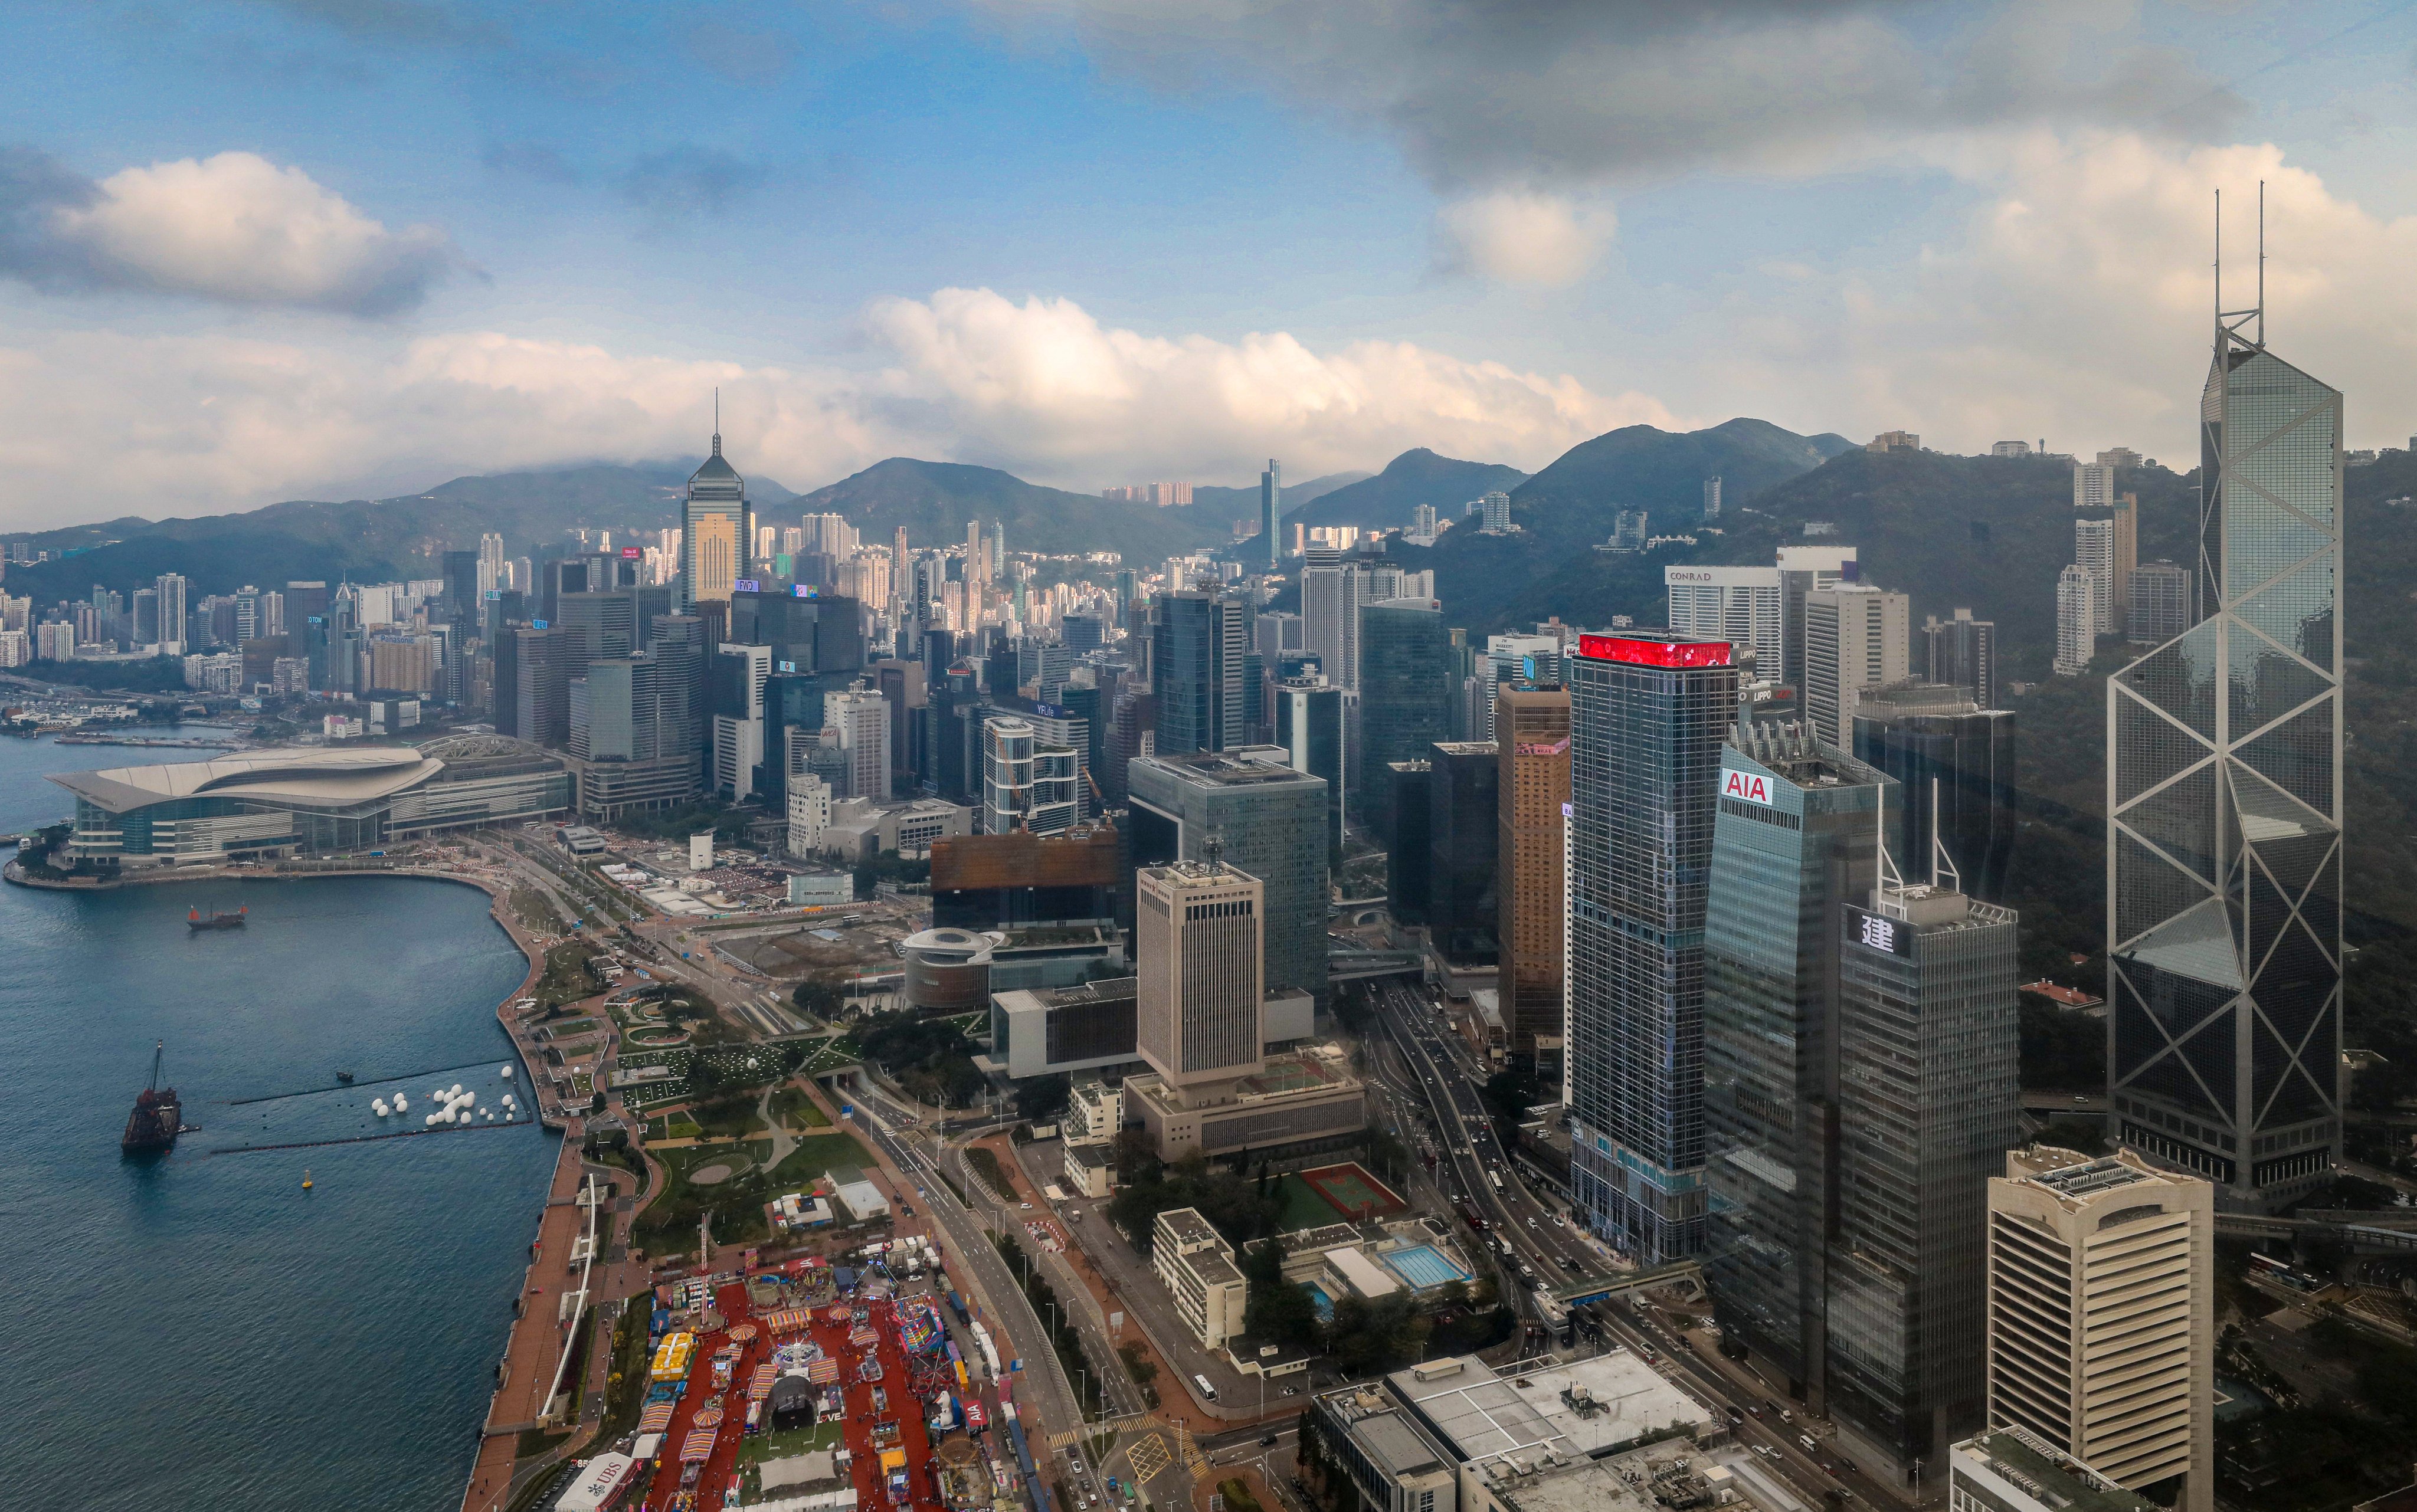 Hong Kong’s Central. The government said it would roll out measures to further enhance the city’s competitiveness as an asset and wealth management hub. Photo: Sun Yeung